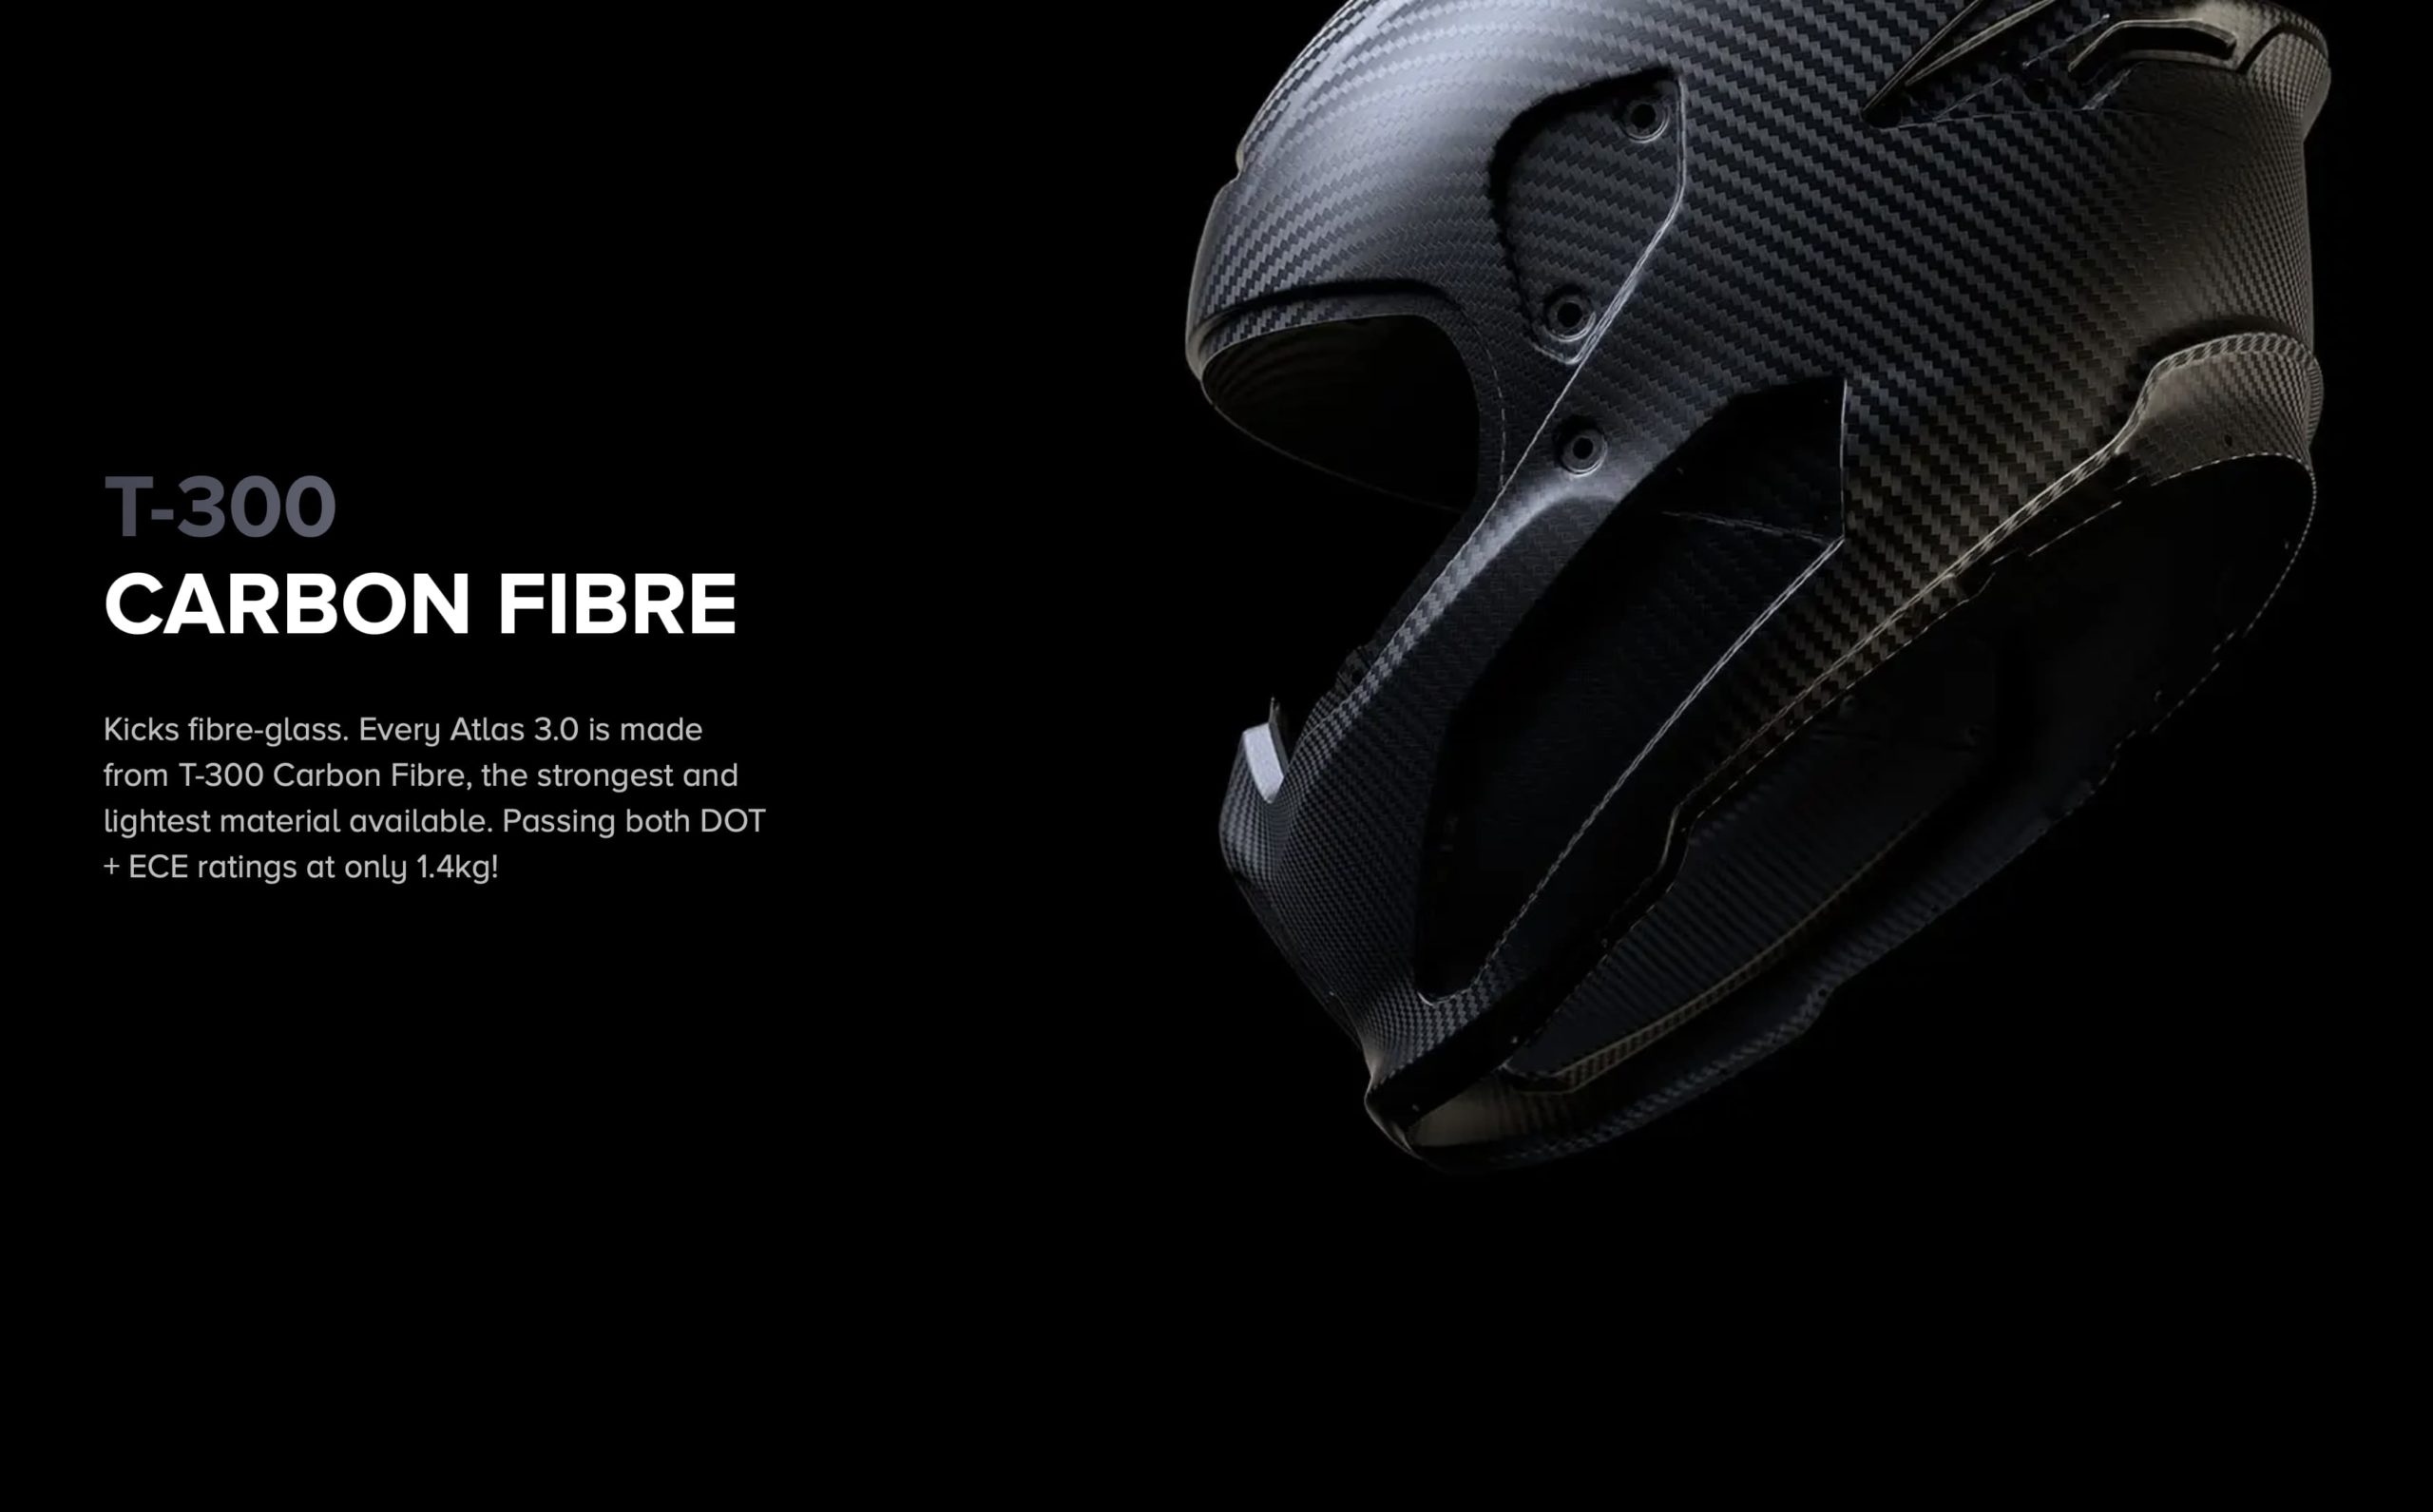 A view of the carbonfiber shell present in all Atlas 3.0 helmets